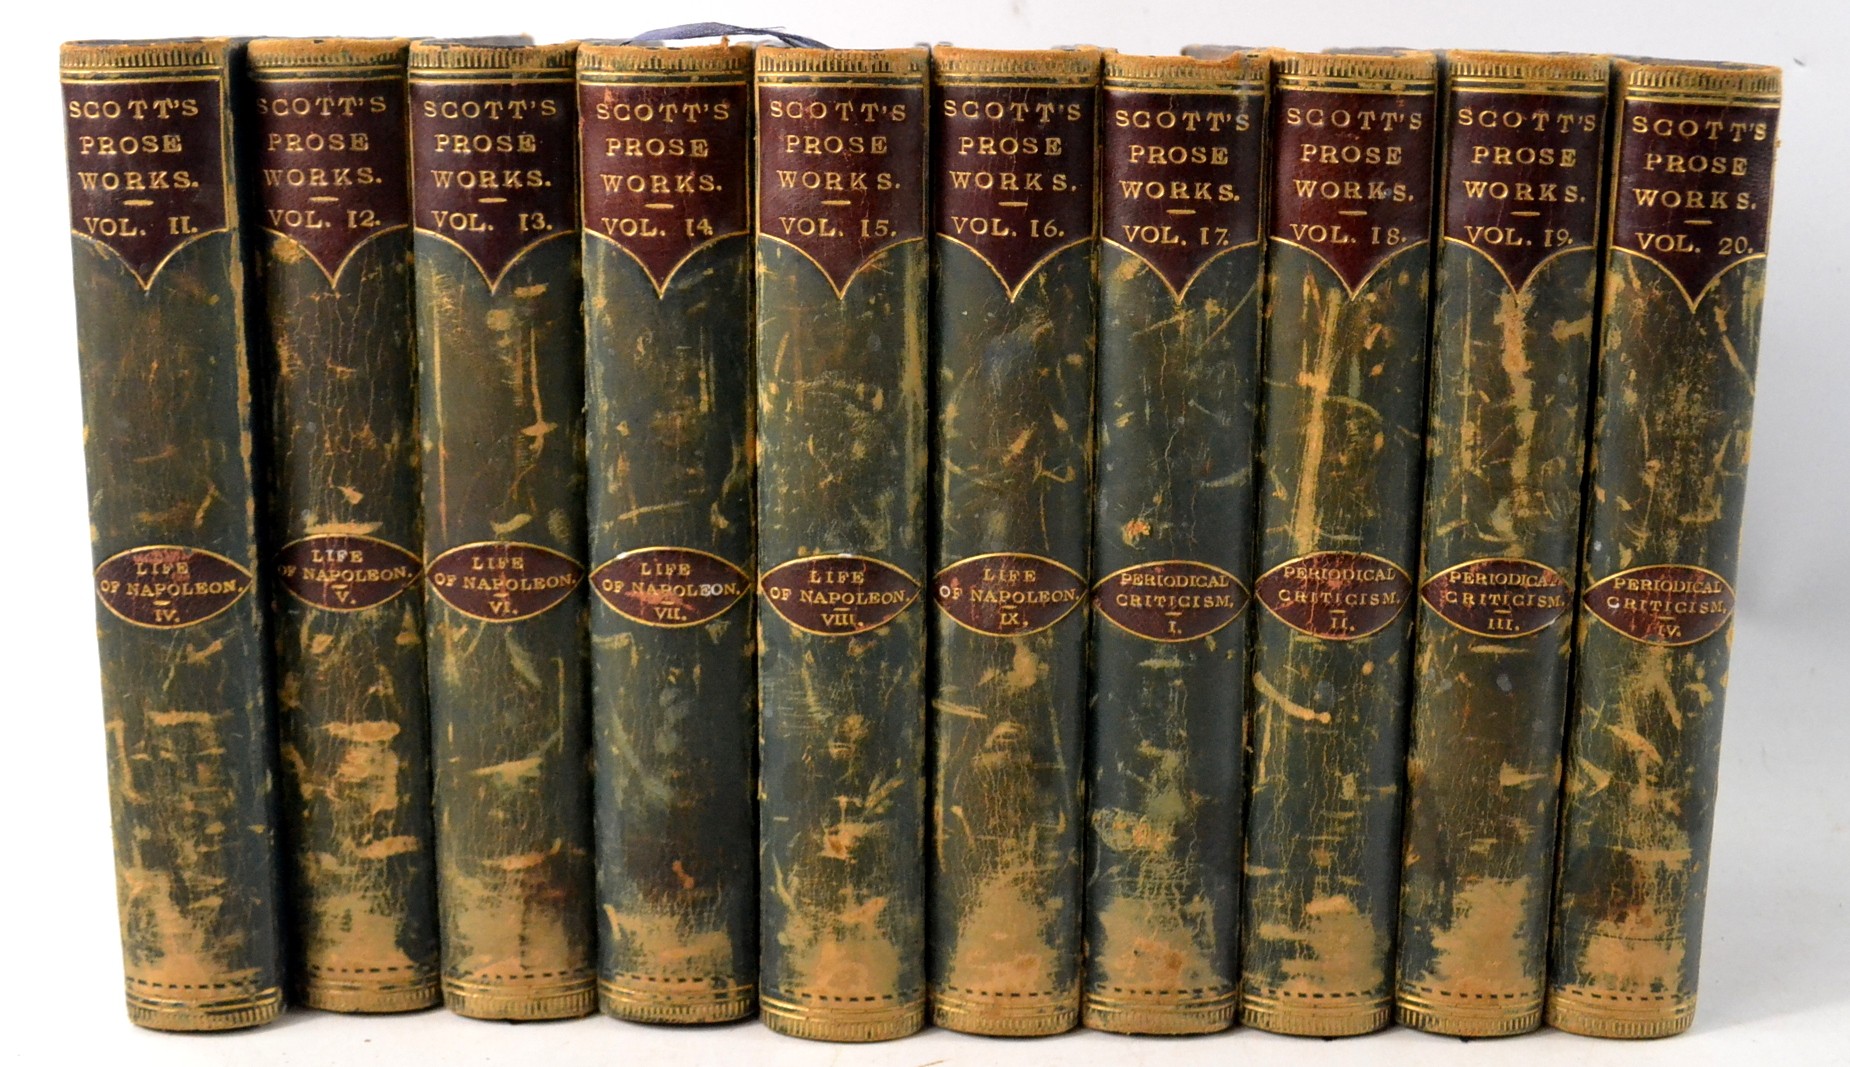 RARE Miscellaneous prose works by Sir Walter Scott (30 volumes) - Image 11 of 13